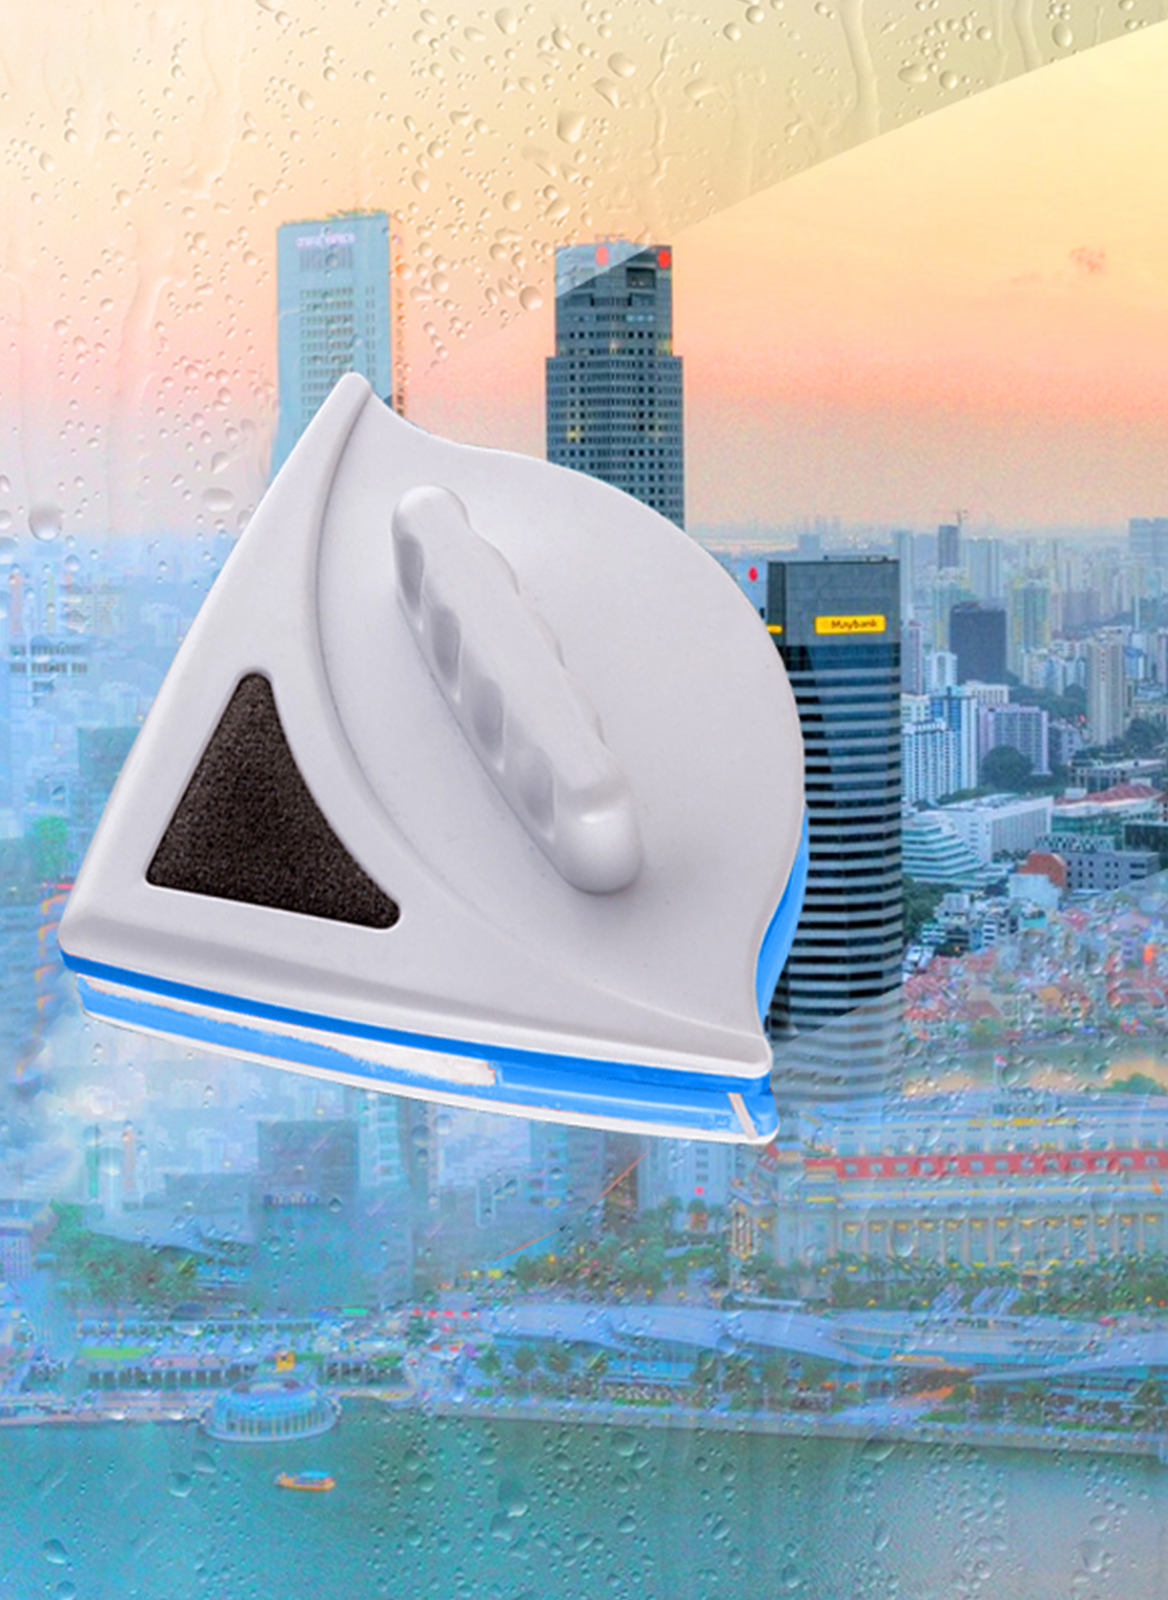 Classic Triangle Magnetic Window Cleaner for Cleaning Windows,Suitable for 3-8mm Single Layer Glass